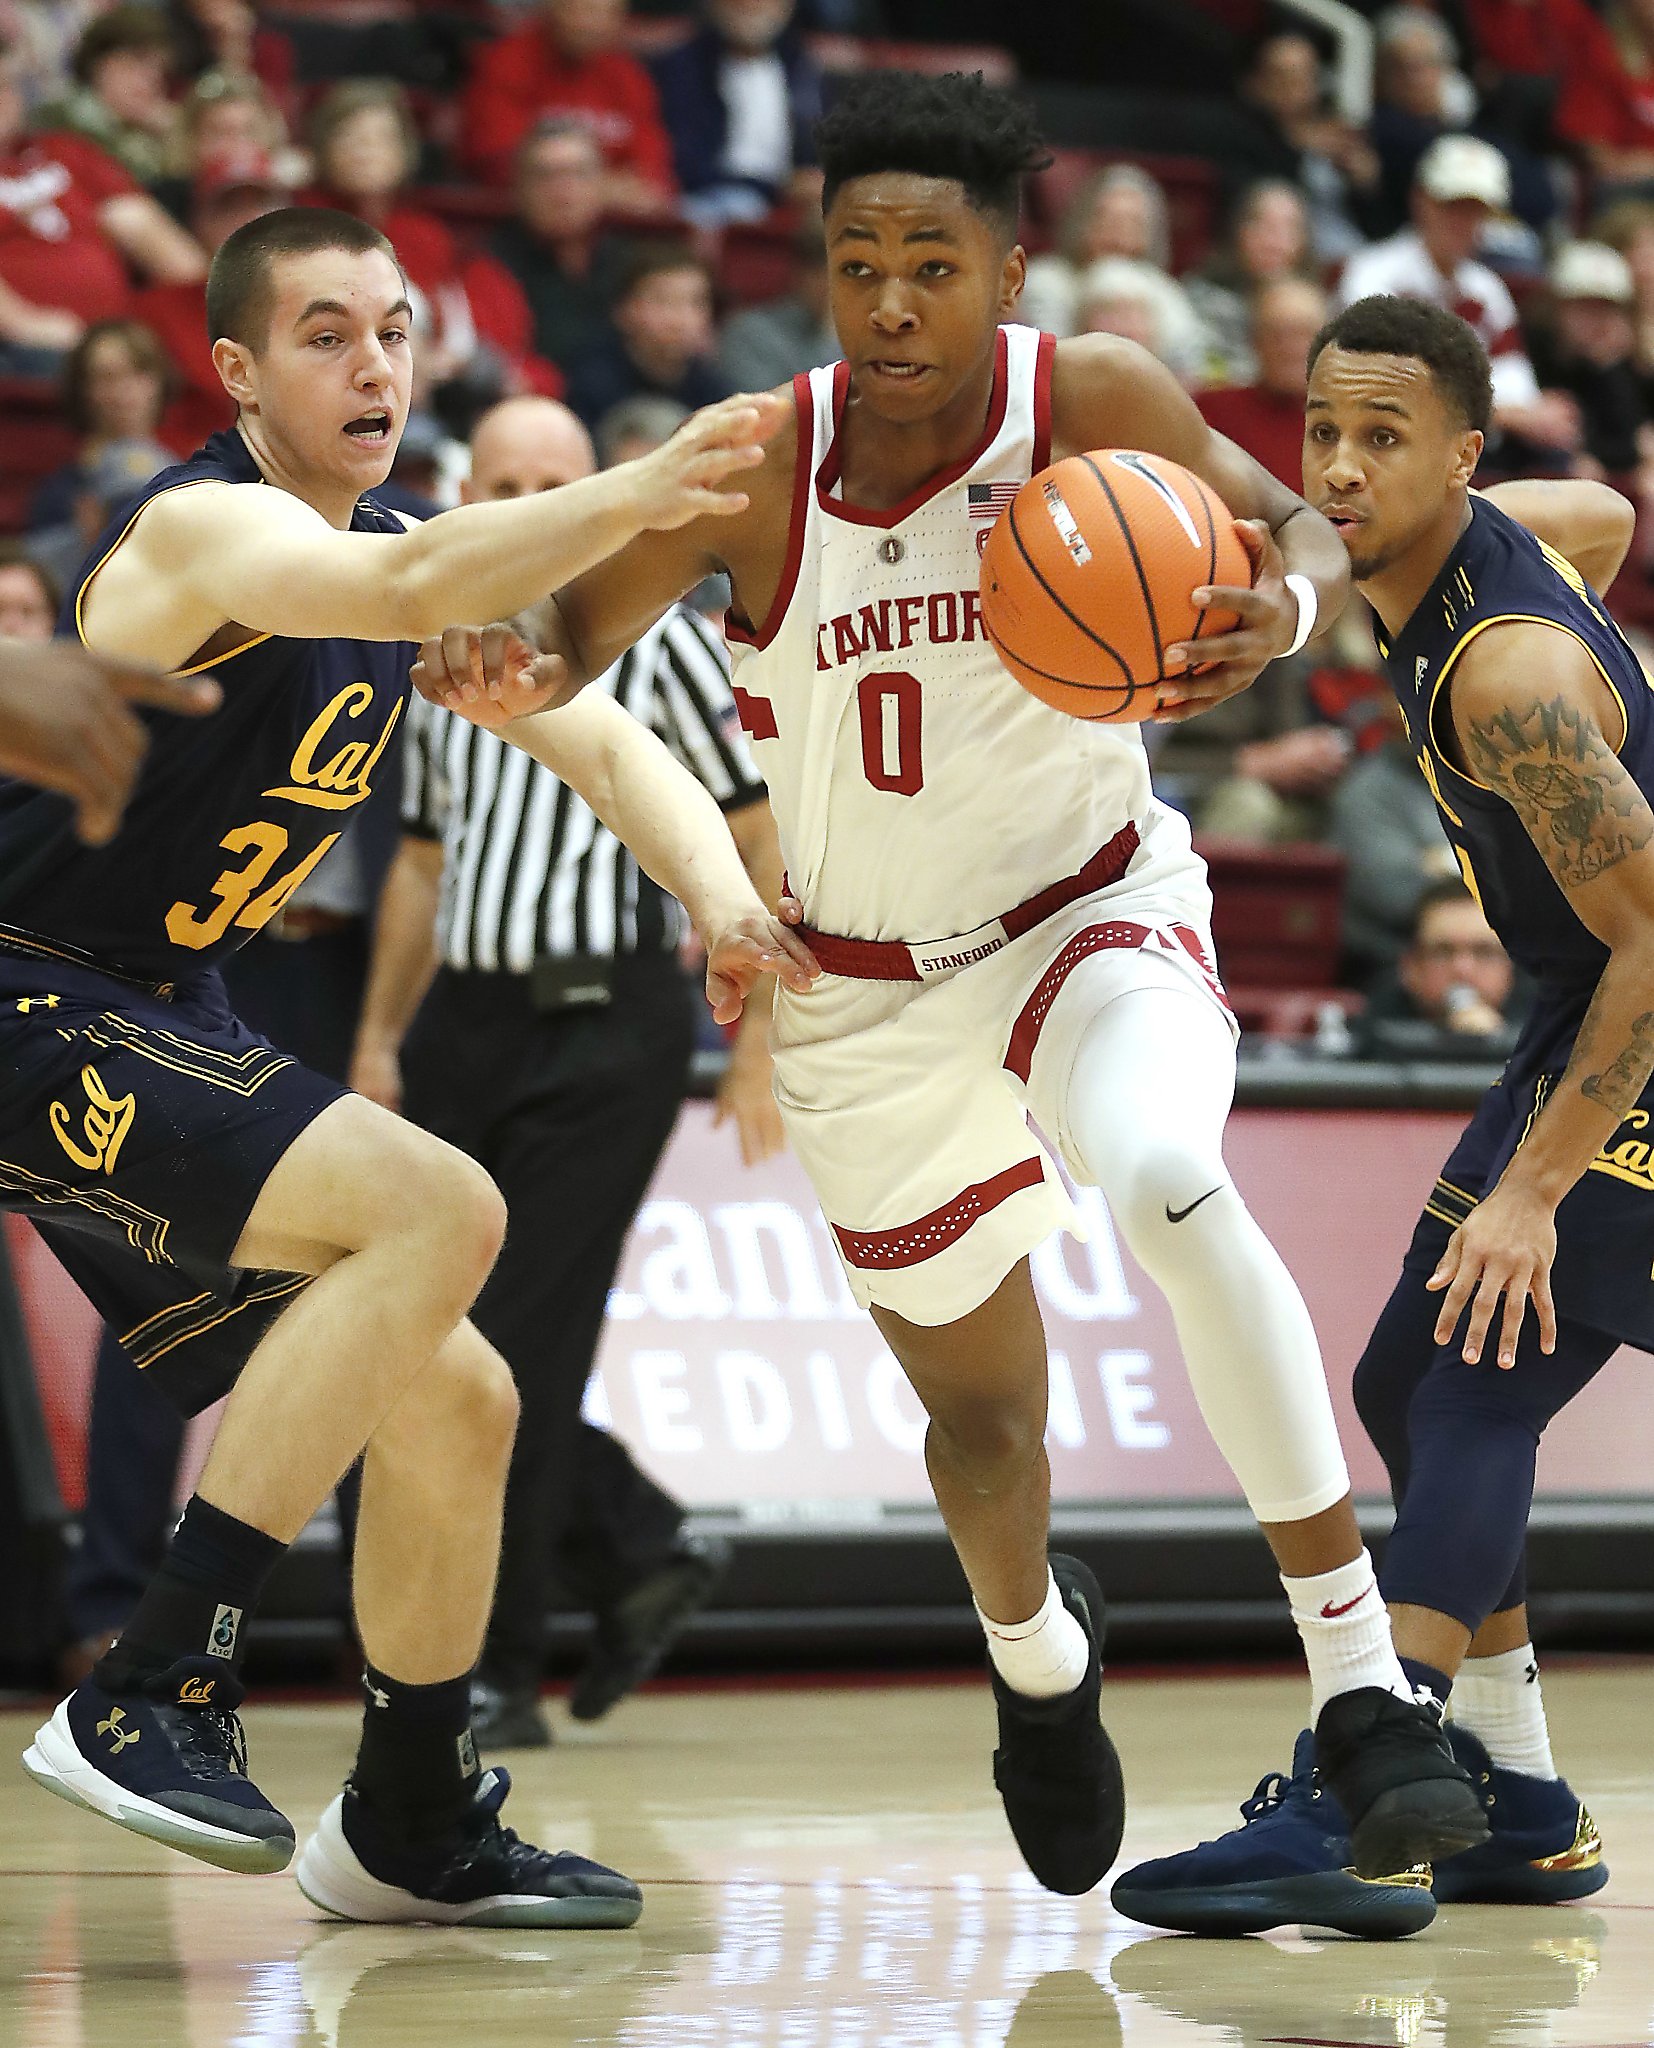 Okpala, Pickens give Stanford hope after discouraging loss - SFGate